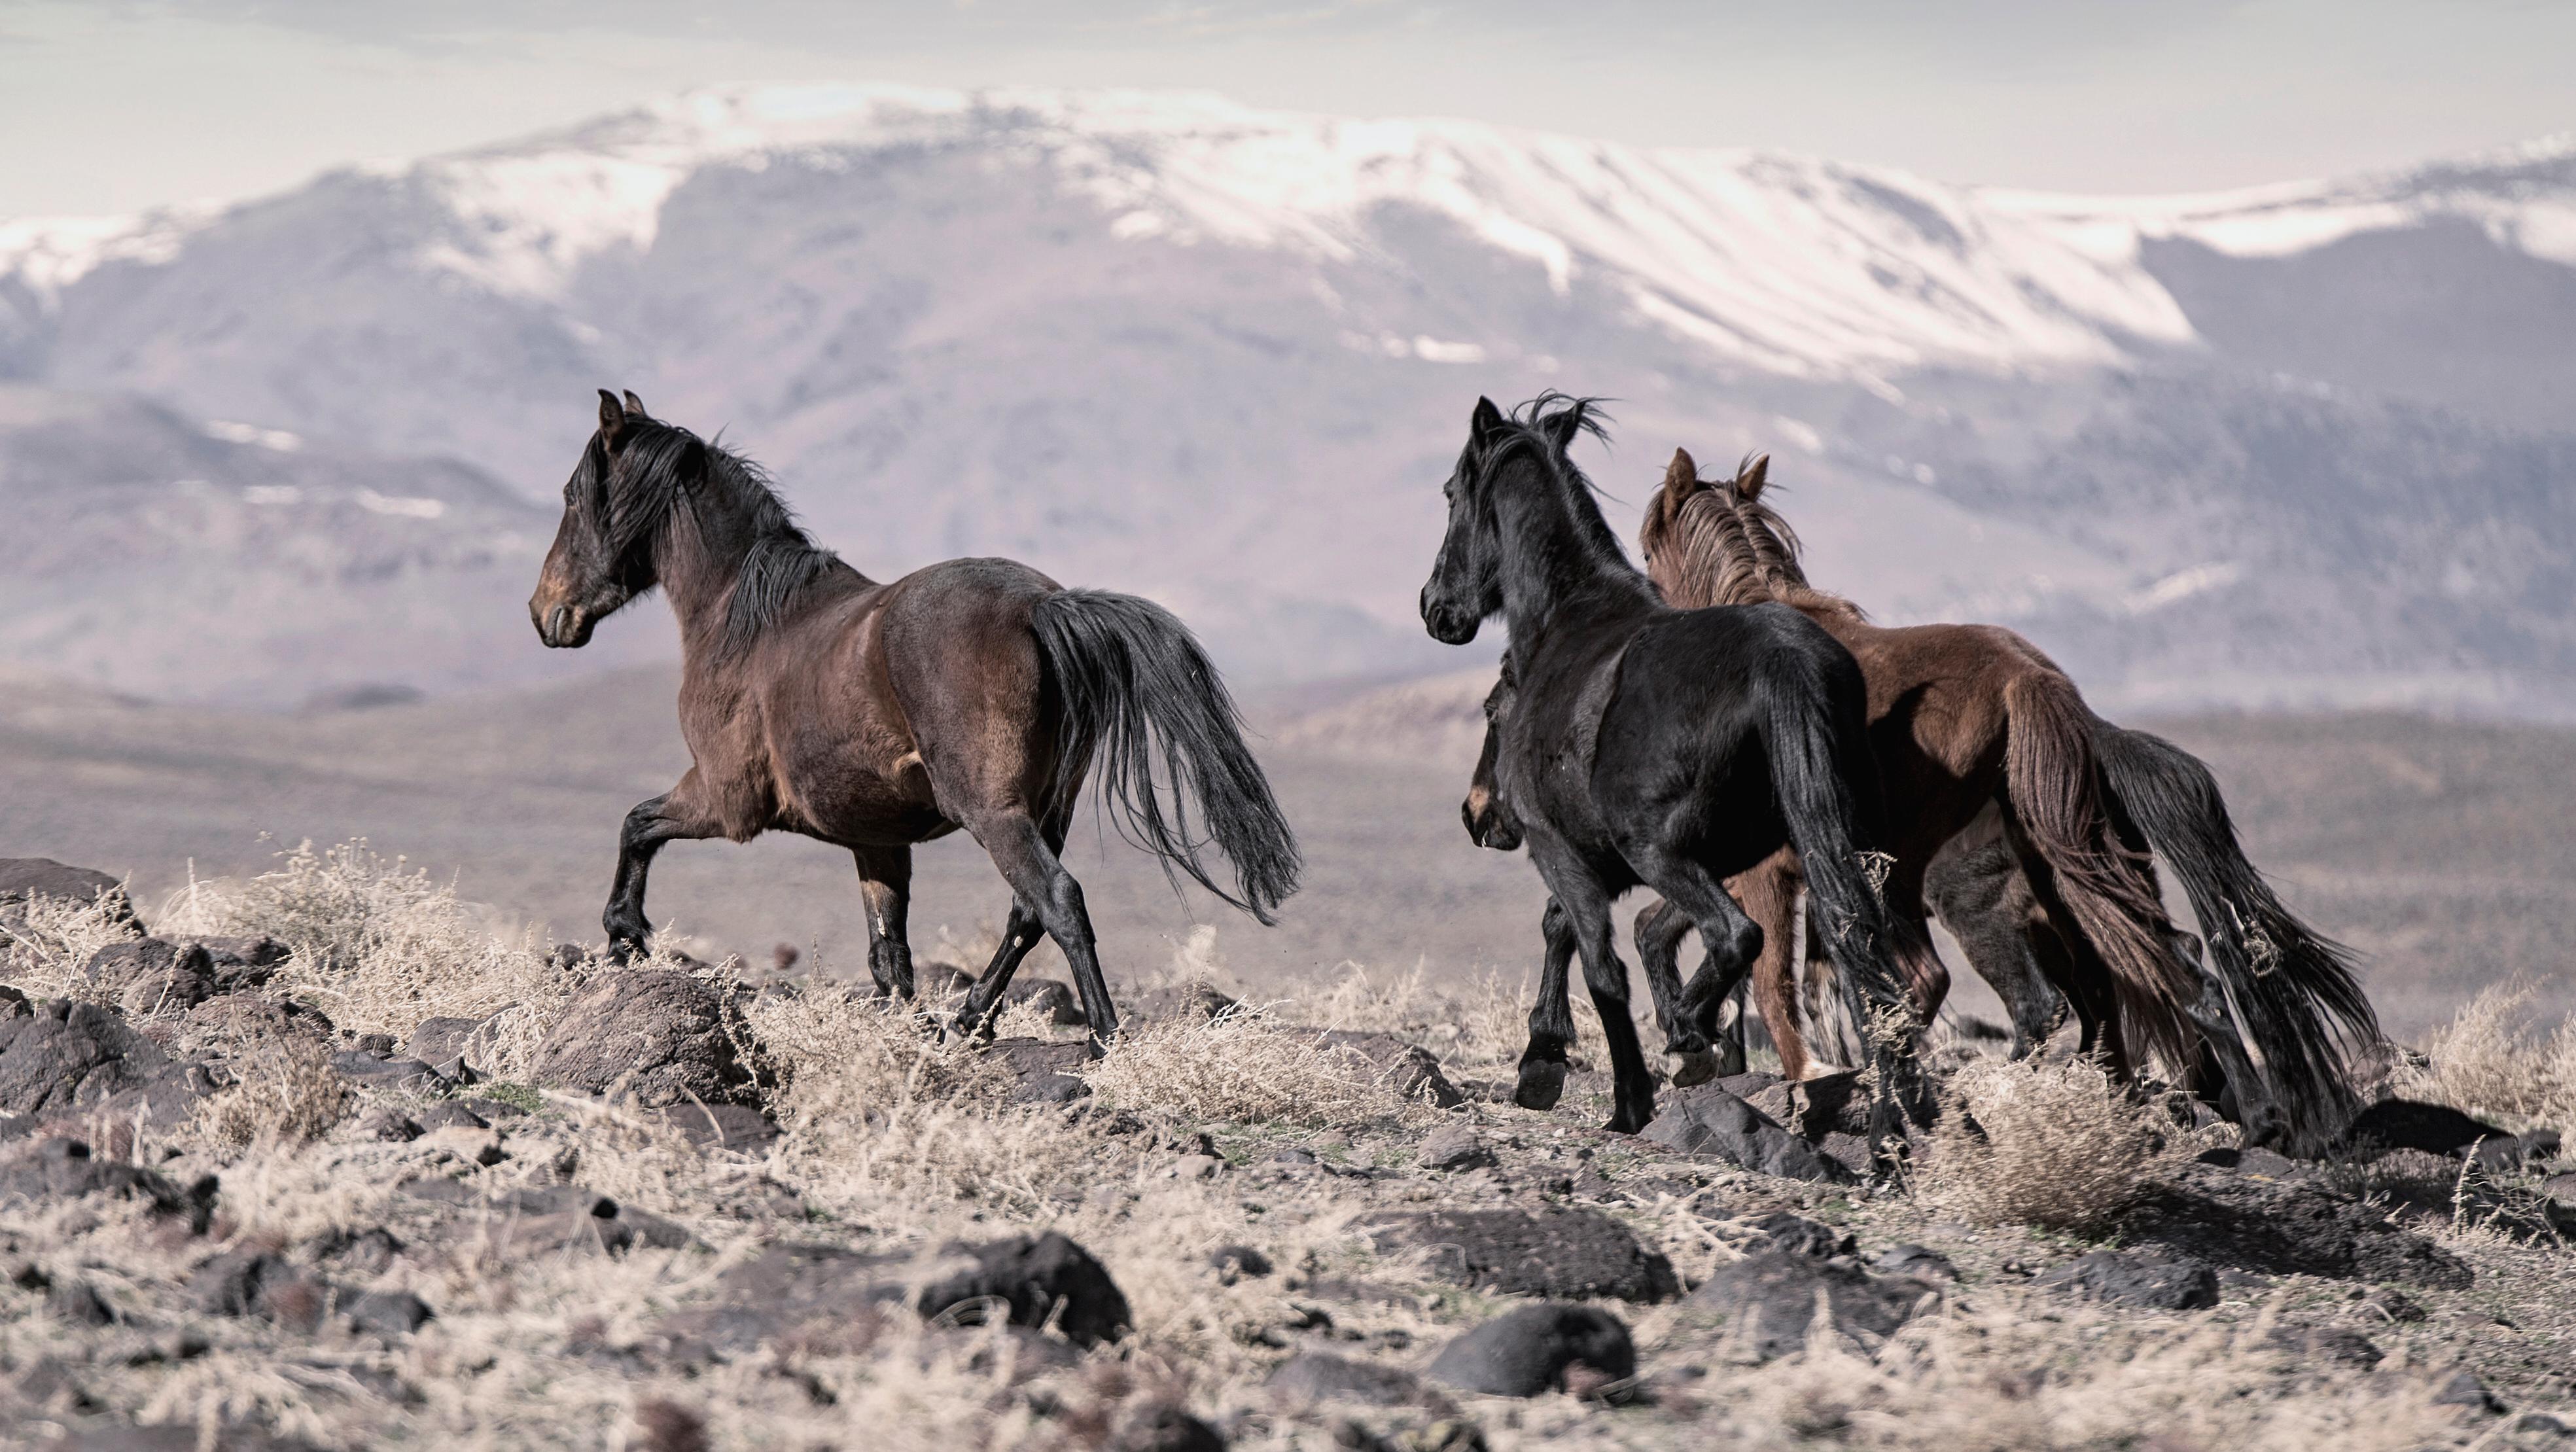 Shane Russeck Animal Print - "On the Go" 20x30 Wild Horses, Mustangs Photography Photograph Western Art